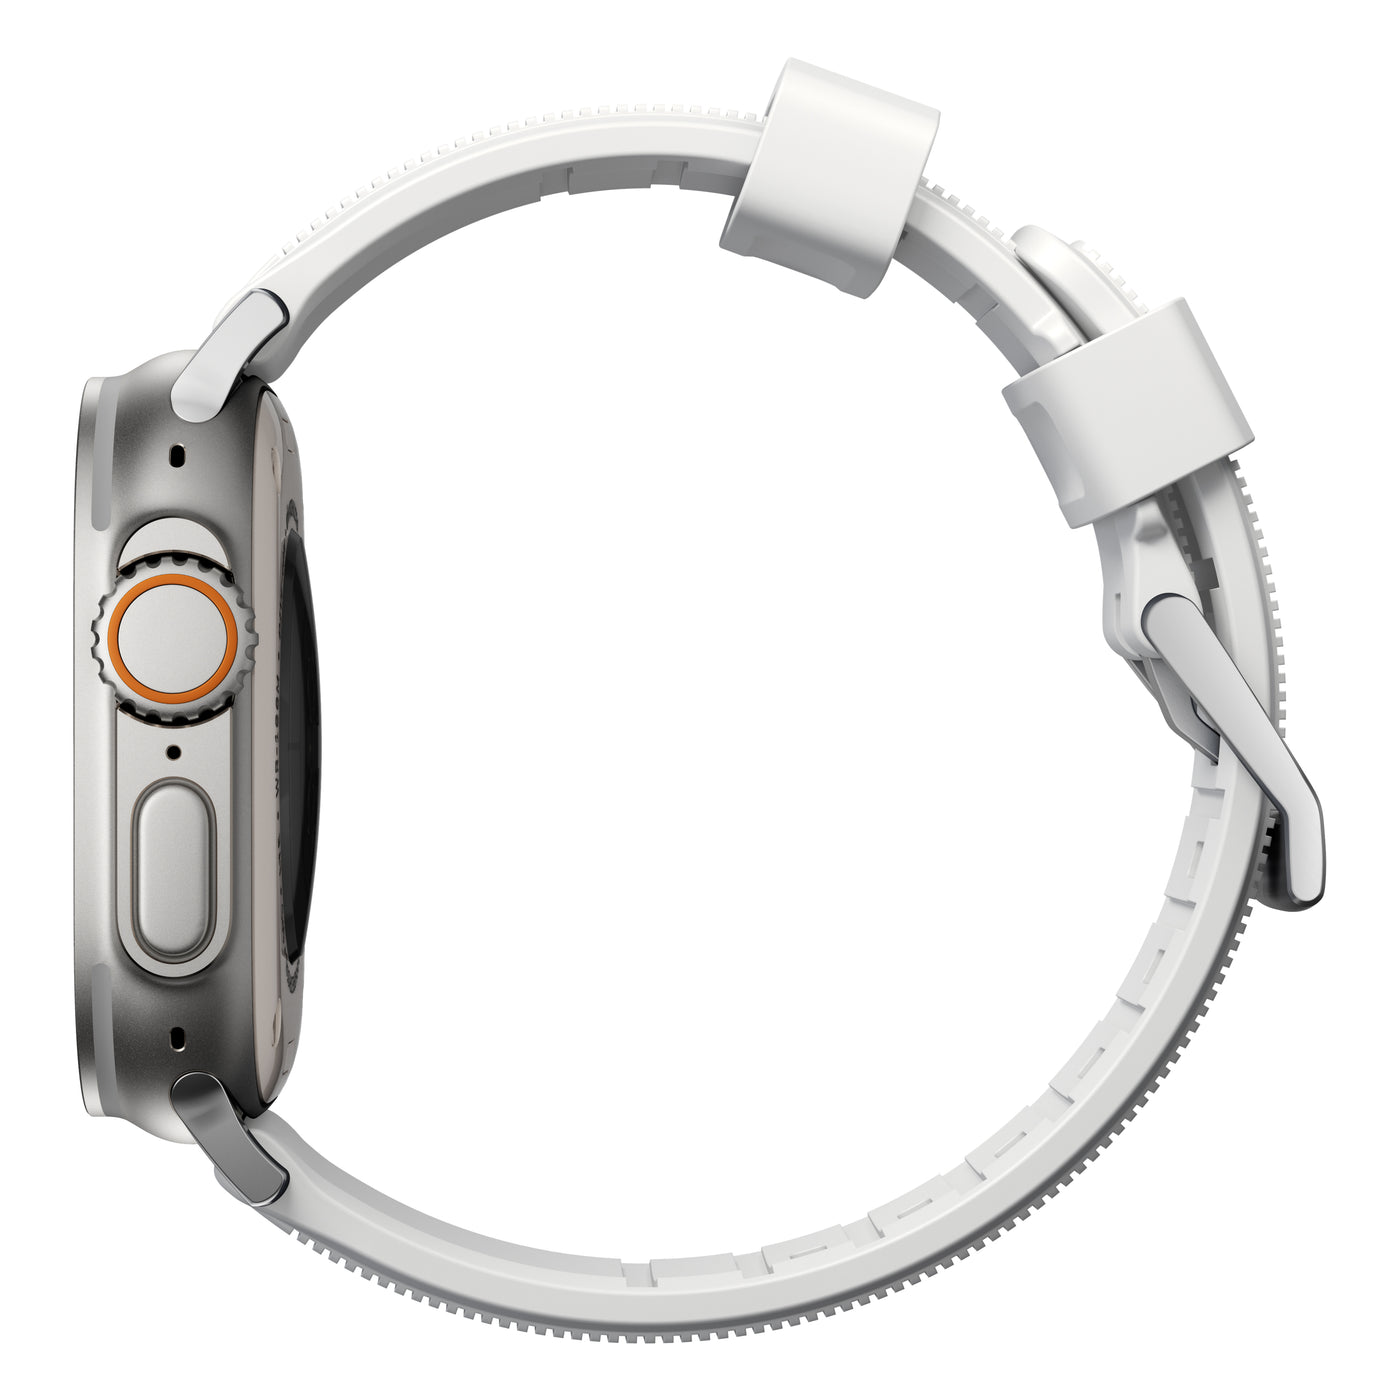 Rugged Band for Apple Watch